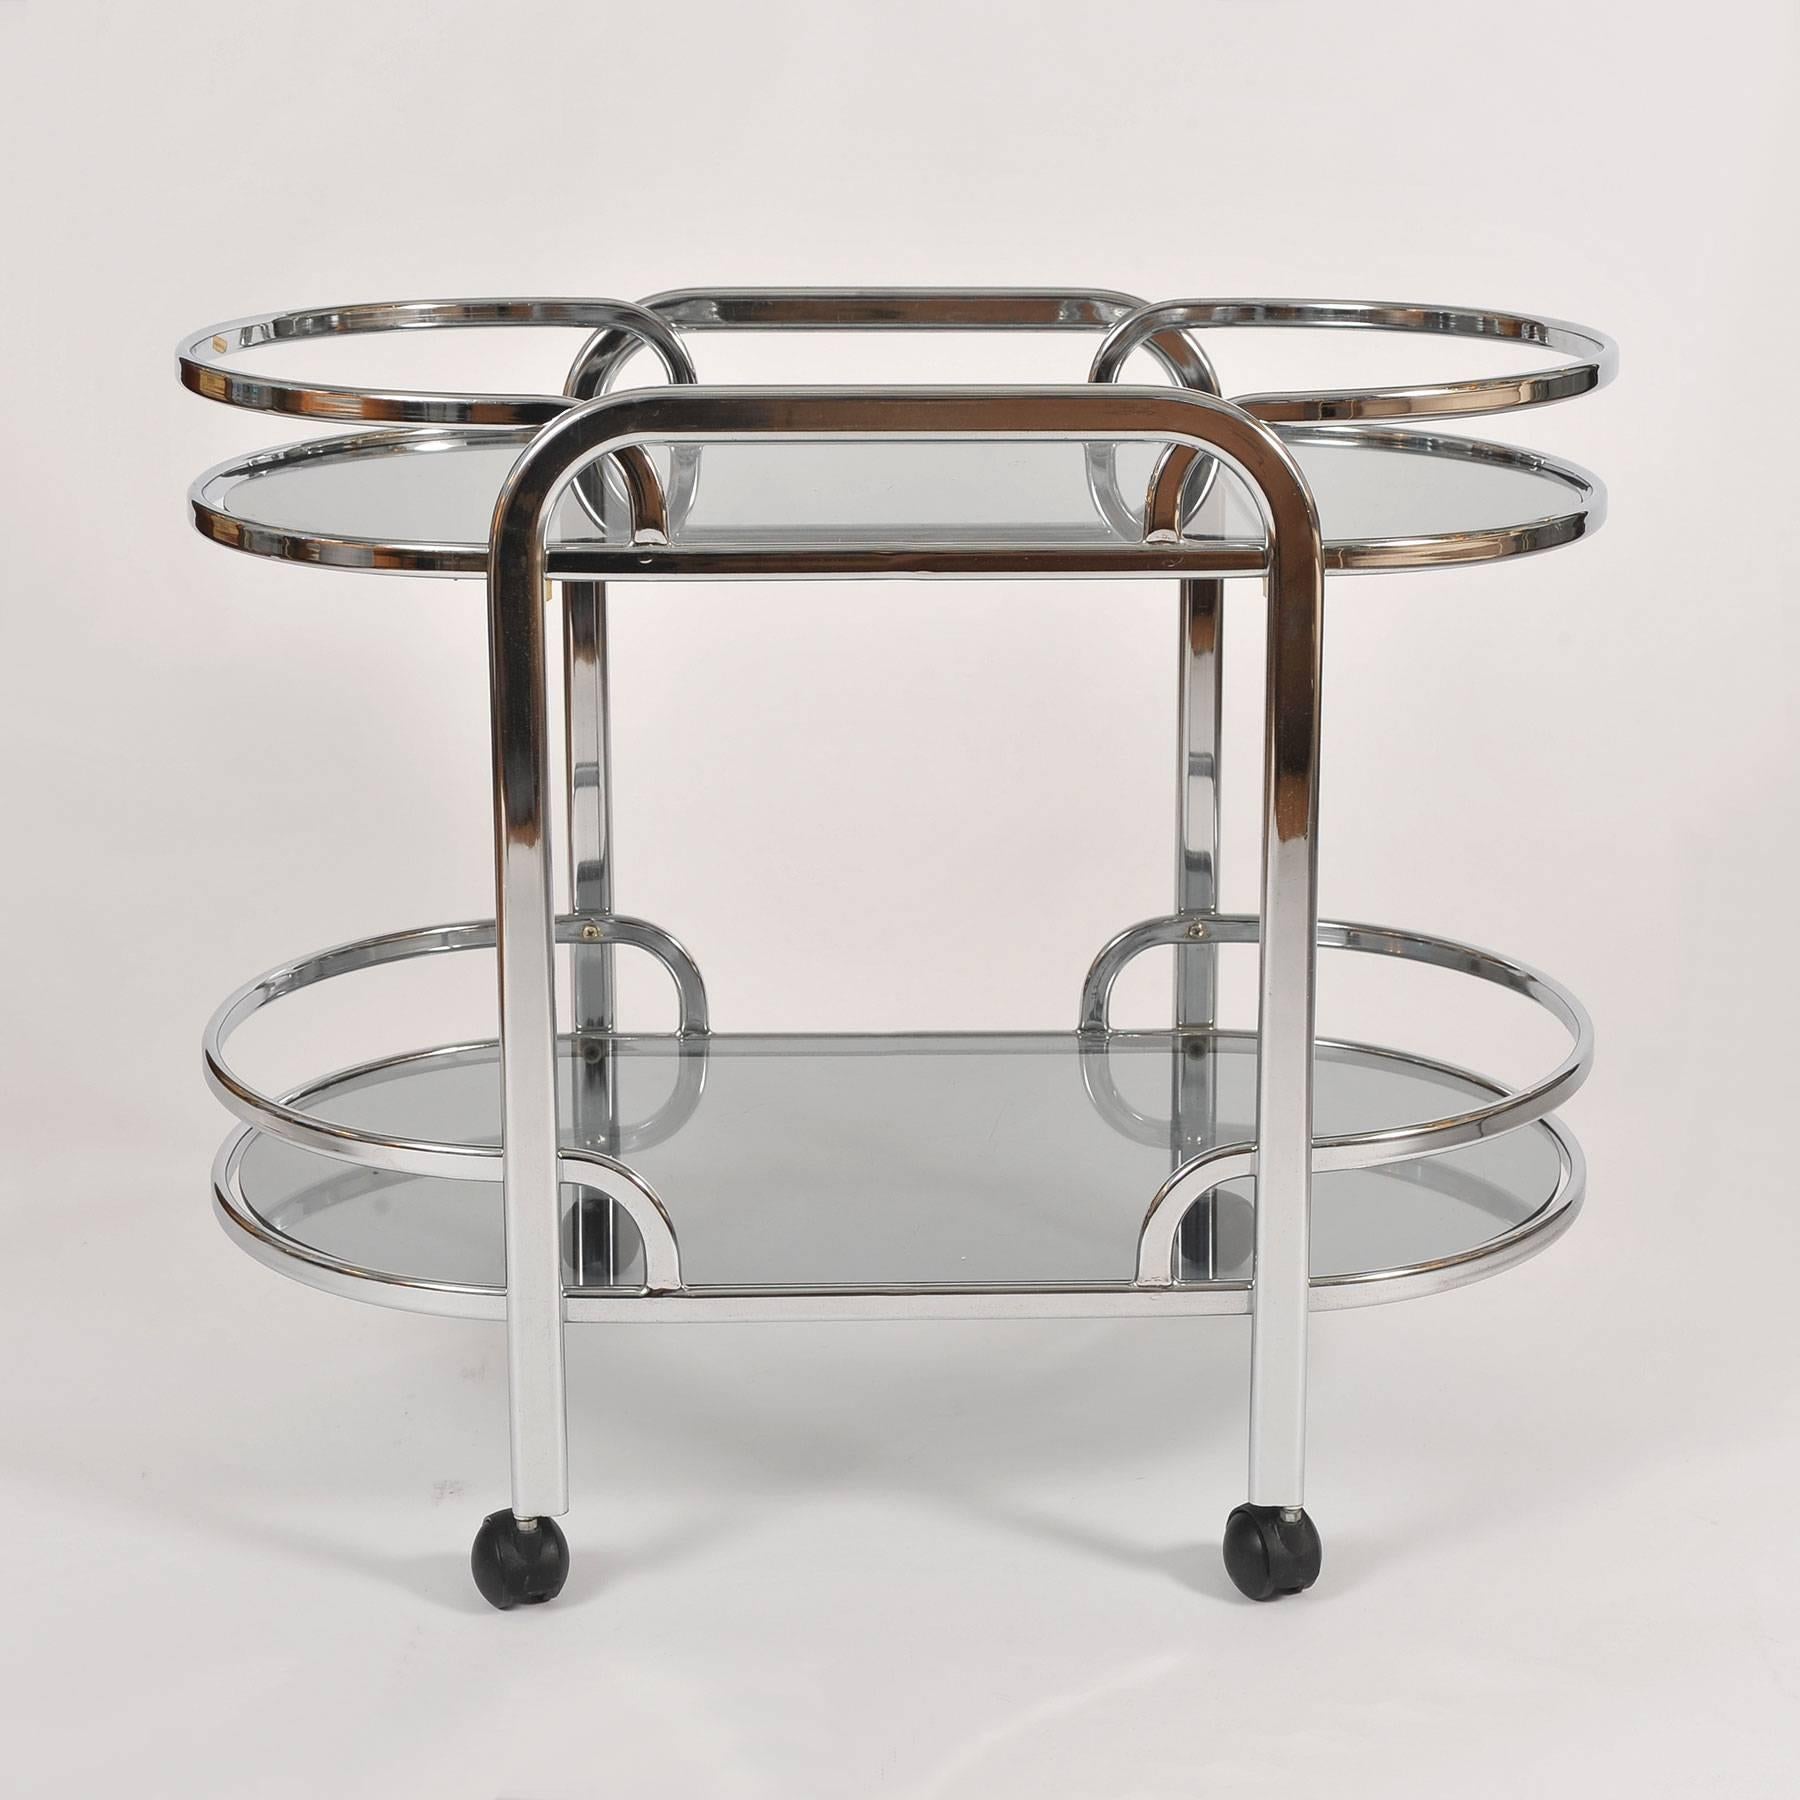 Curved bar cart/drinks trolley with two smokey glass shelves, on castor wheels for smooth movement.